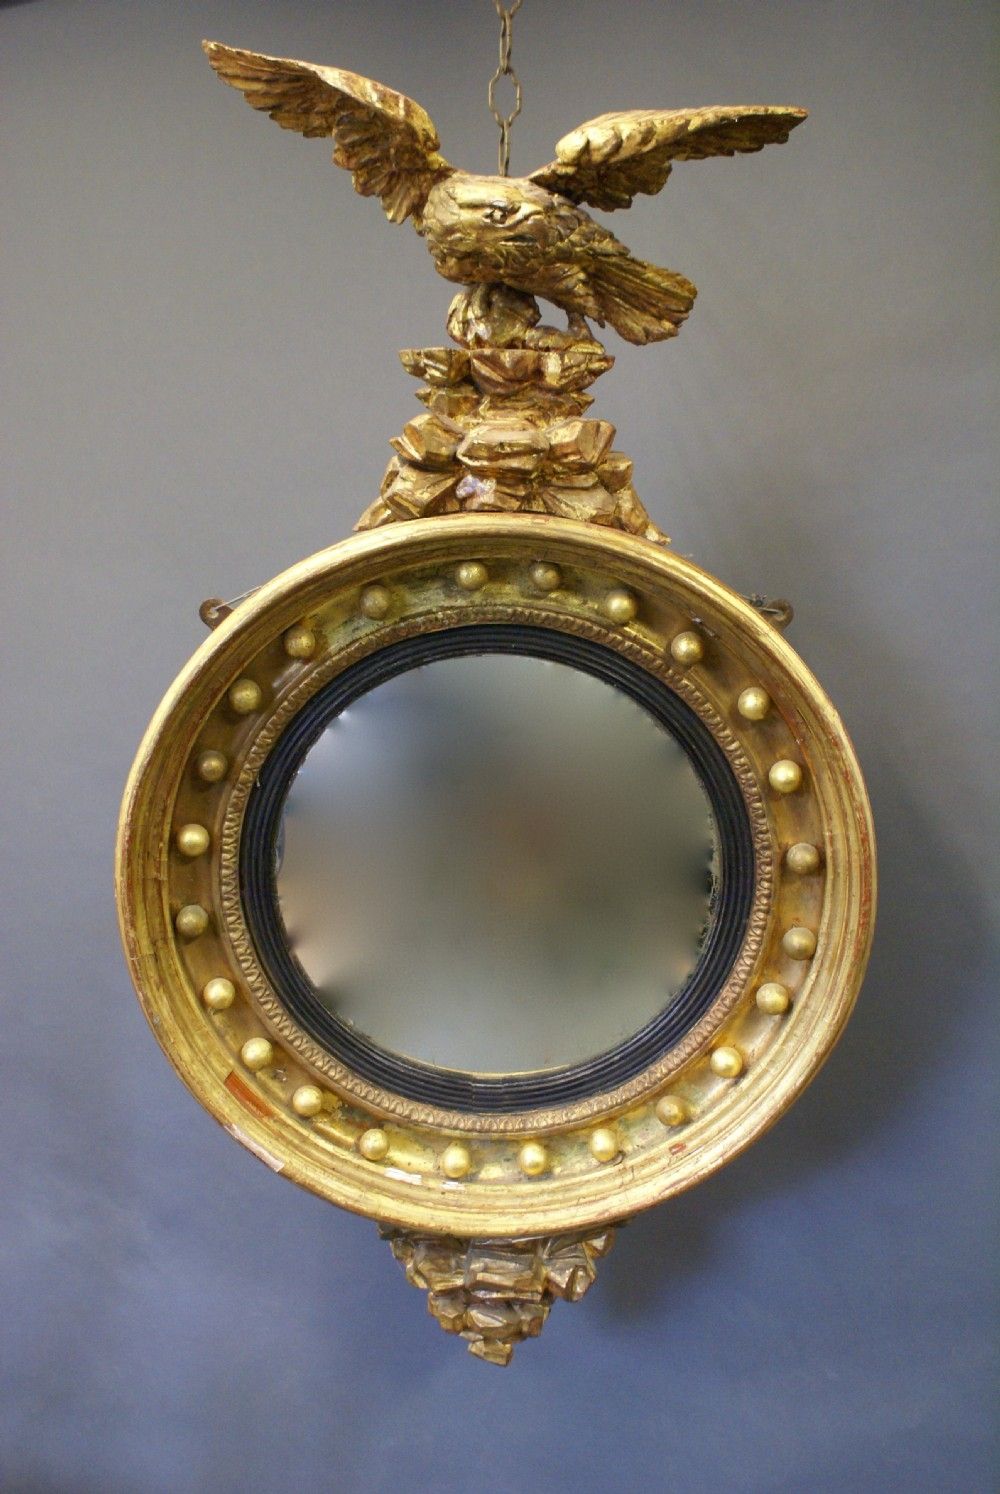 A Regency Convex Mirror With Carved Eagle 302704 With Antique Convex Mirrors For Sale (View 14 of 15)